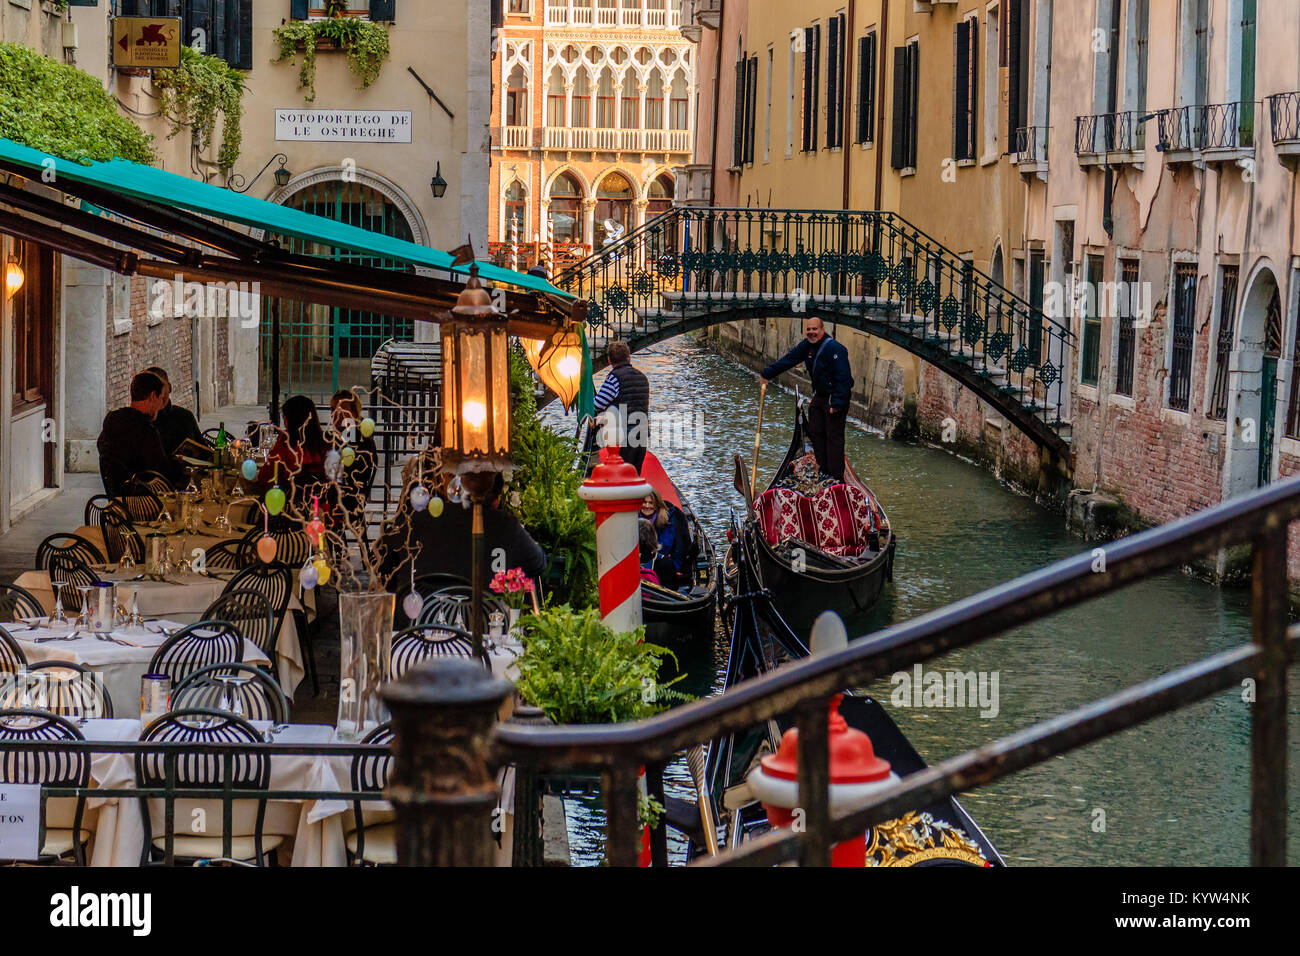 Man with a gondola passes an outdoor restaurant terrace by a canal in Venice, Italy. Stock Photo